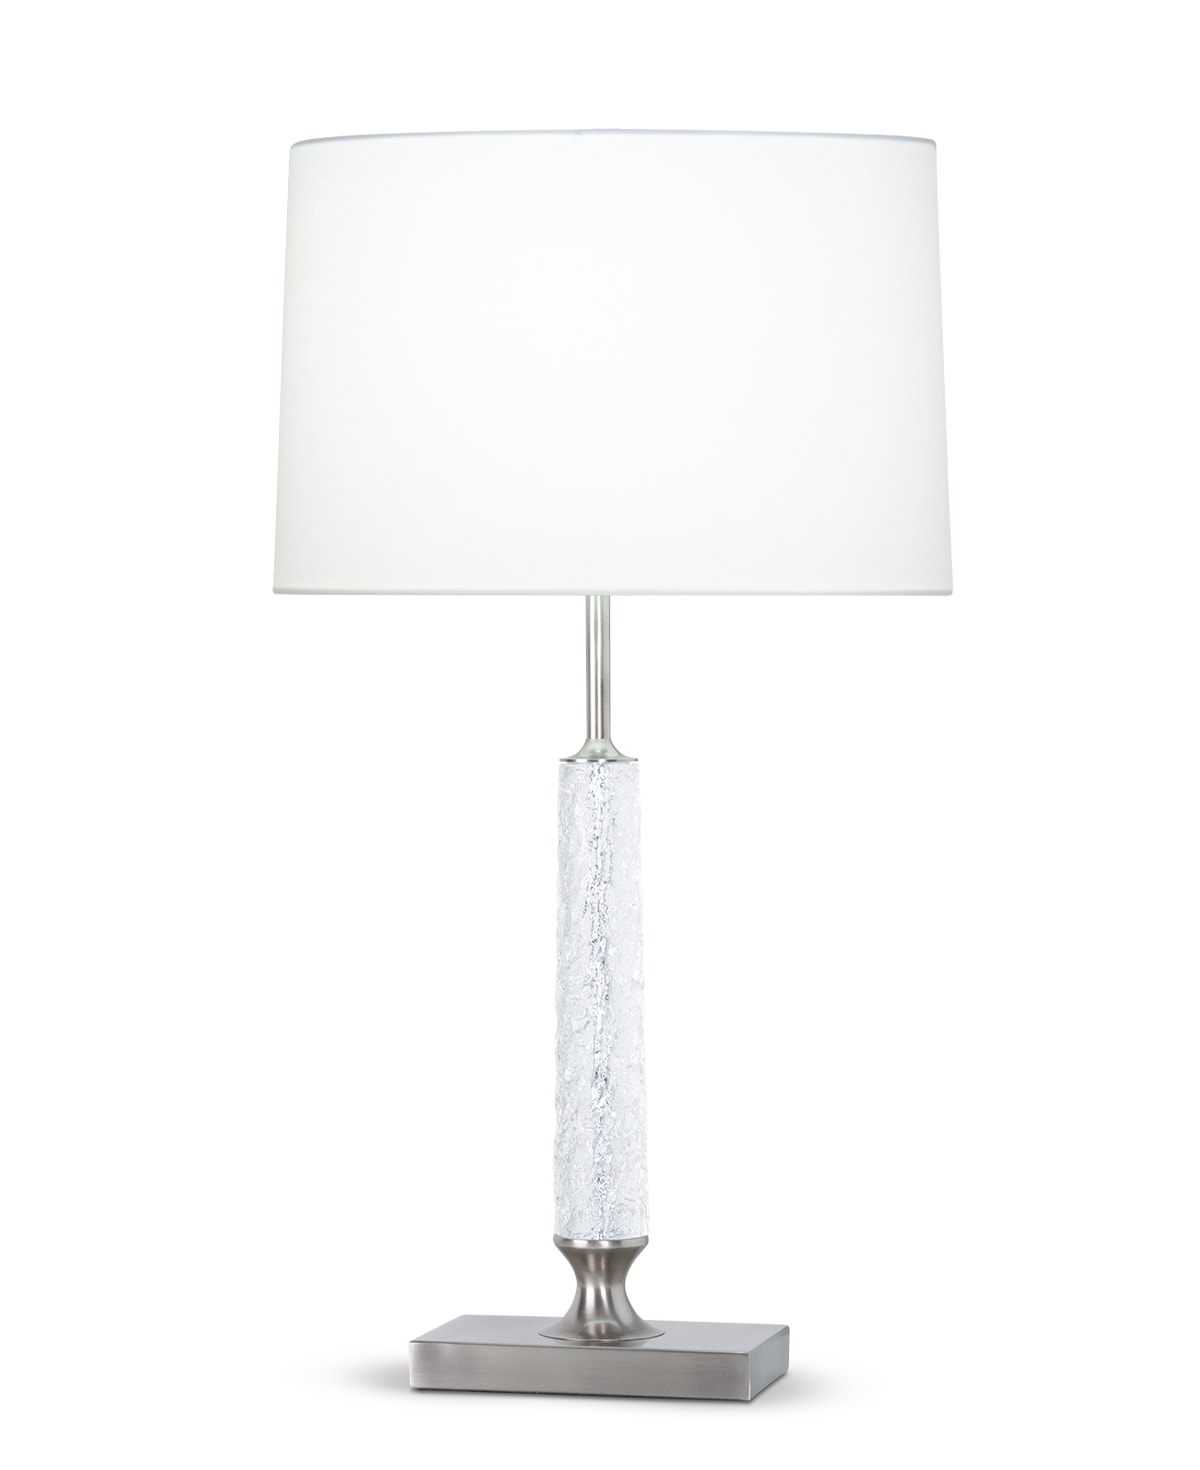 FlowDecor Thornton Table Lamp in metal with antique silver finish and crystal and off-white cotton oval shade (# 4555)